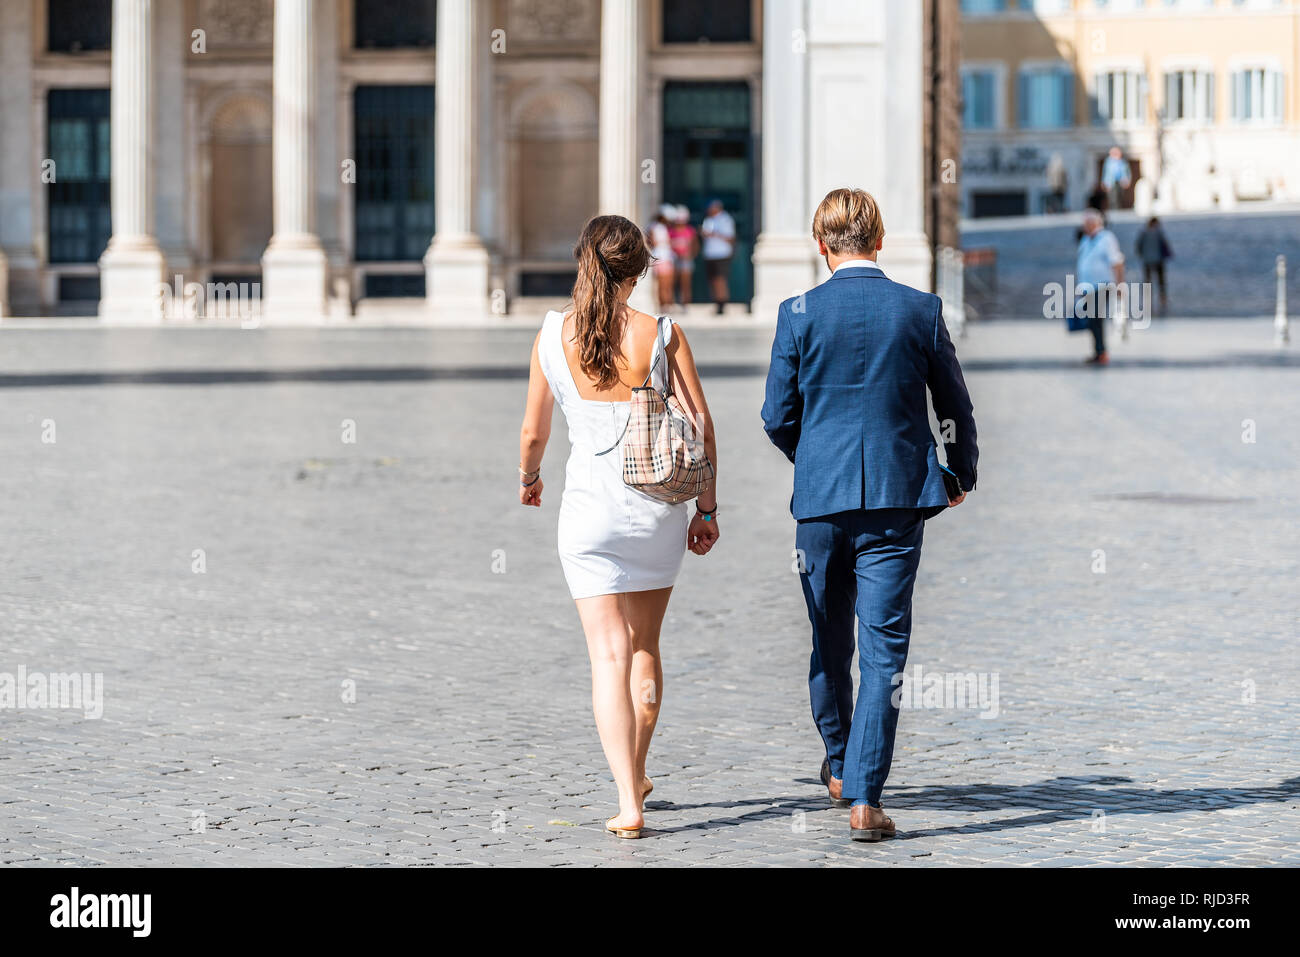 Rome, Italy - September 4, 2018: Local Italian man couple in city street work businessman and woman walking on piazza square in suit by Palazzo Wedeki Stock Photo